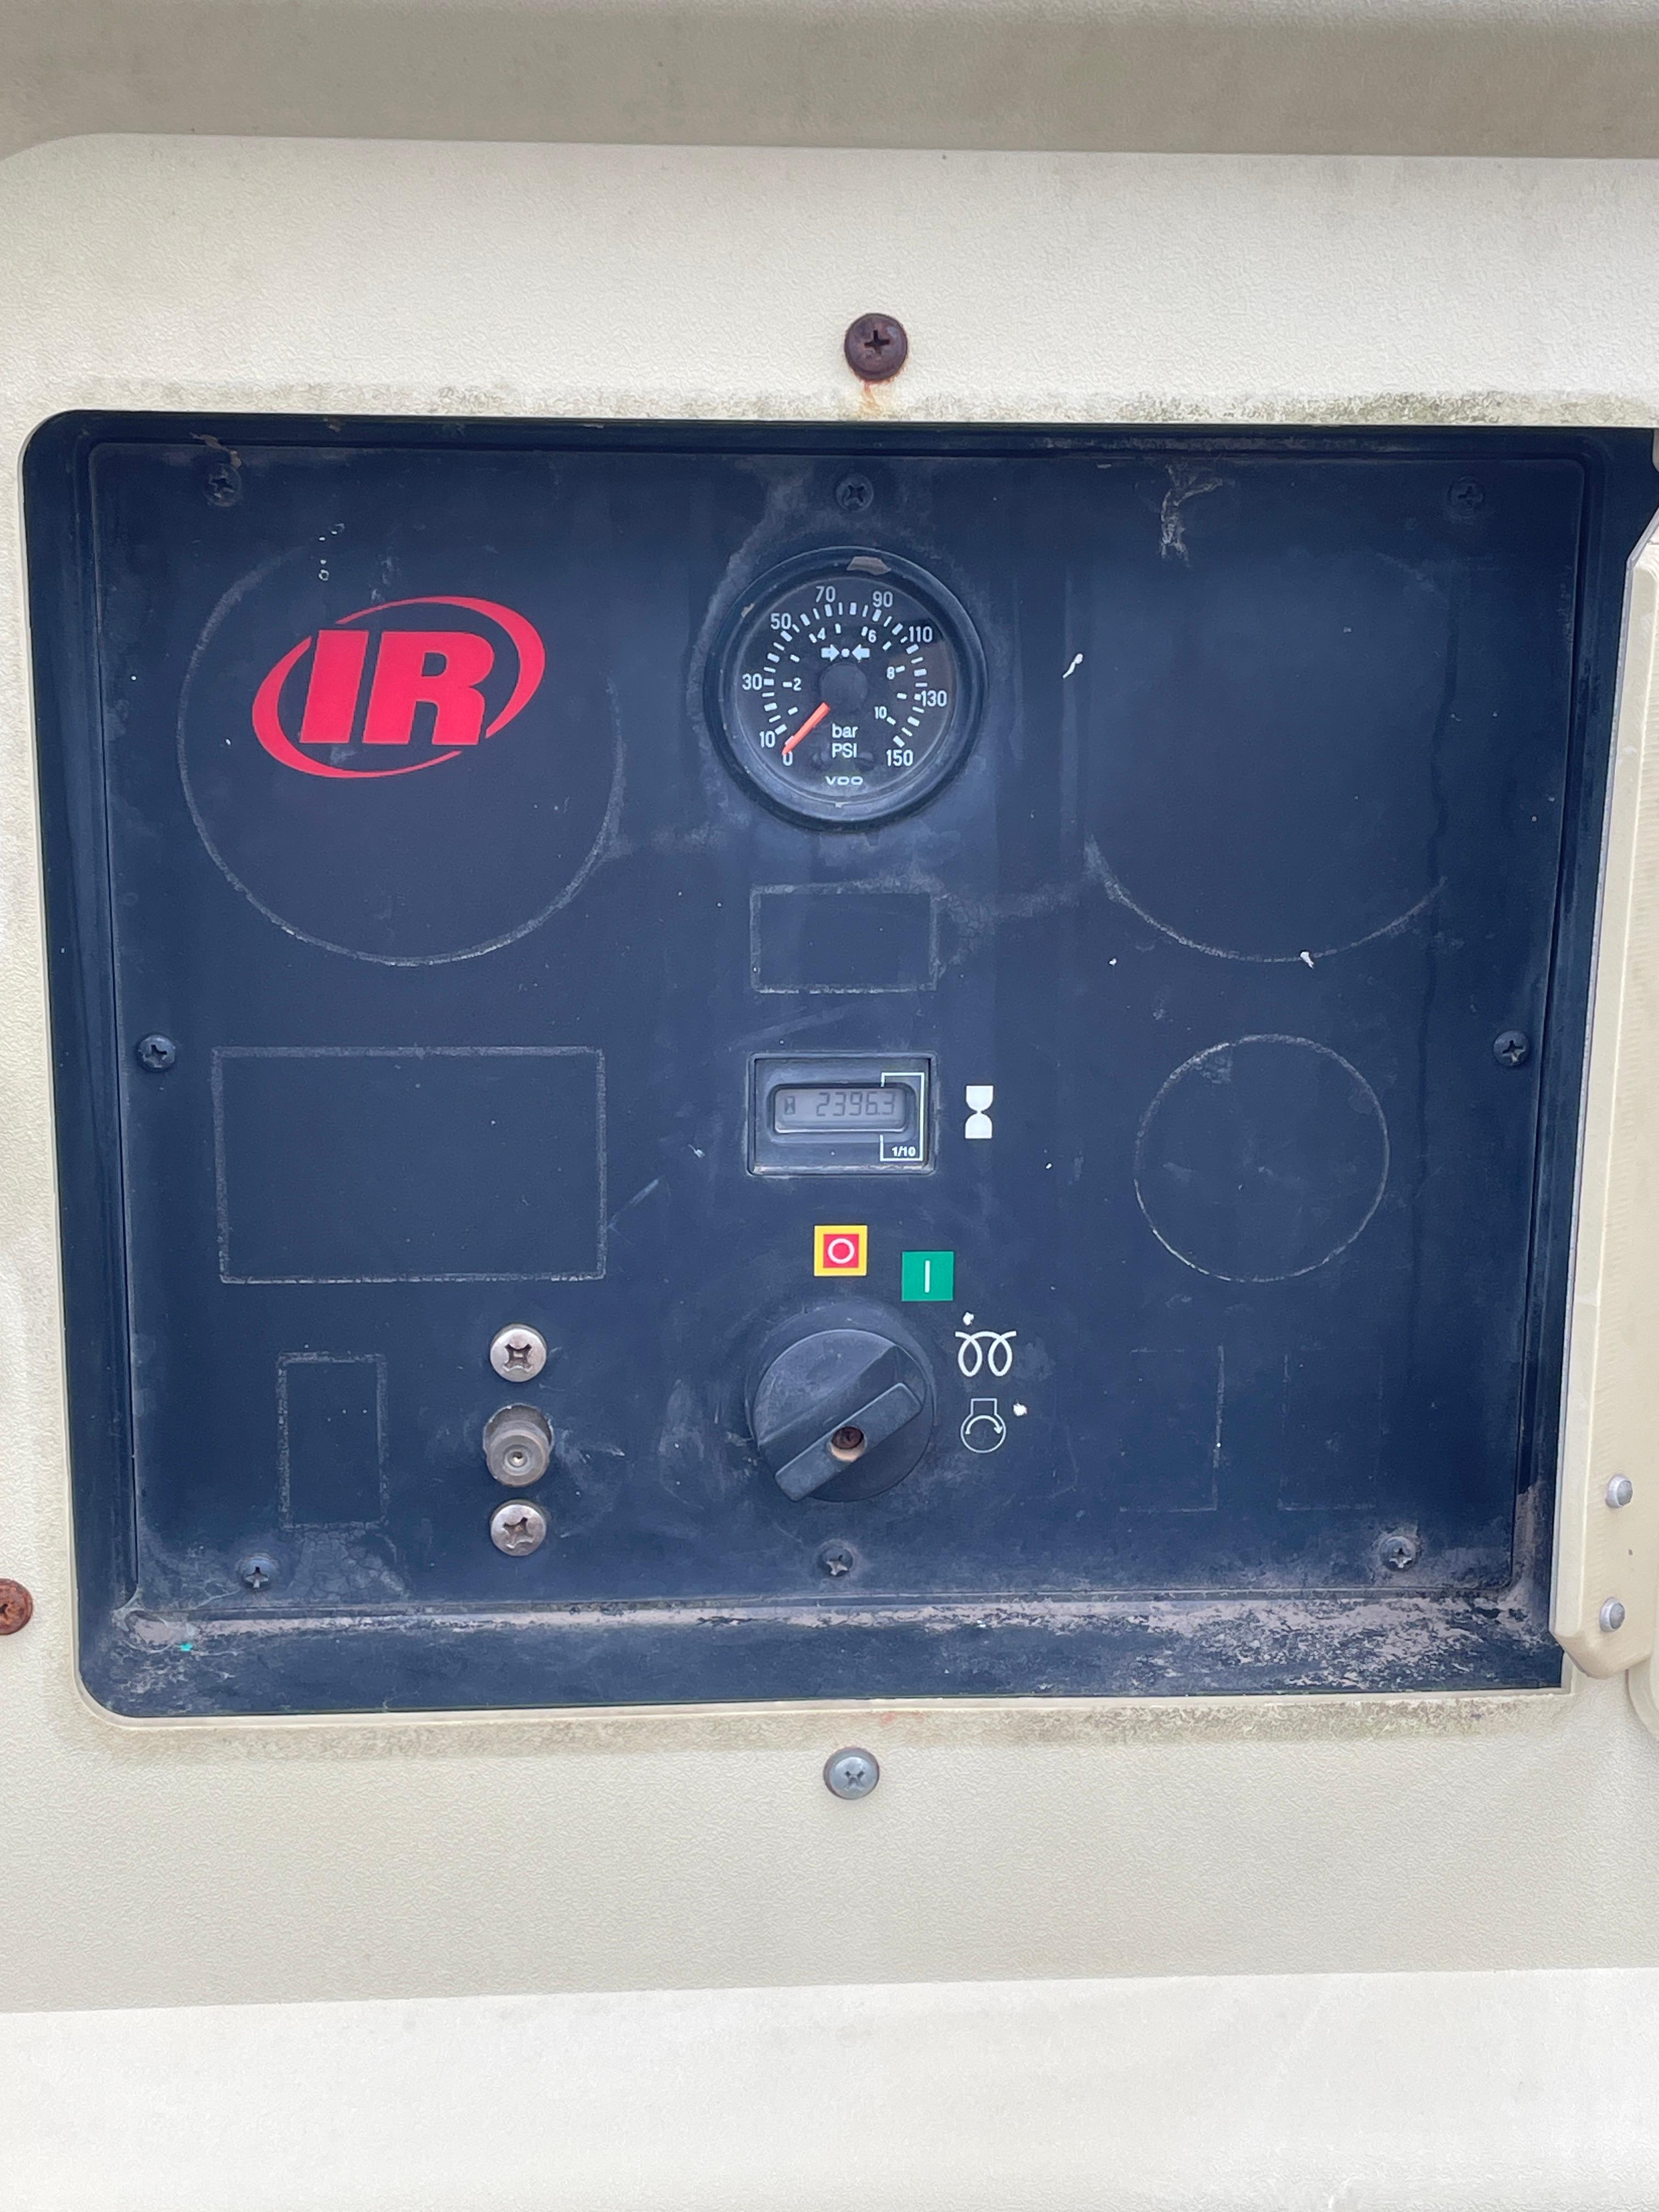 2003 Ingersoll Rand 185 Towable Air Compressor